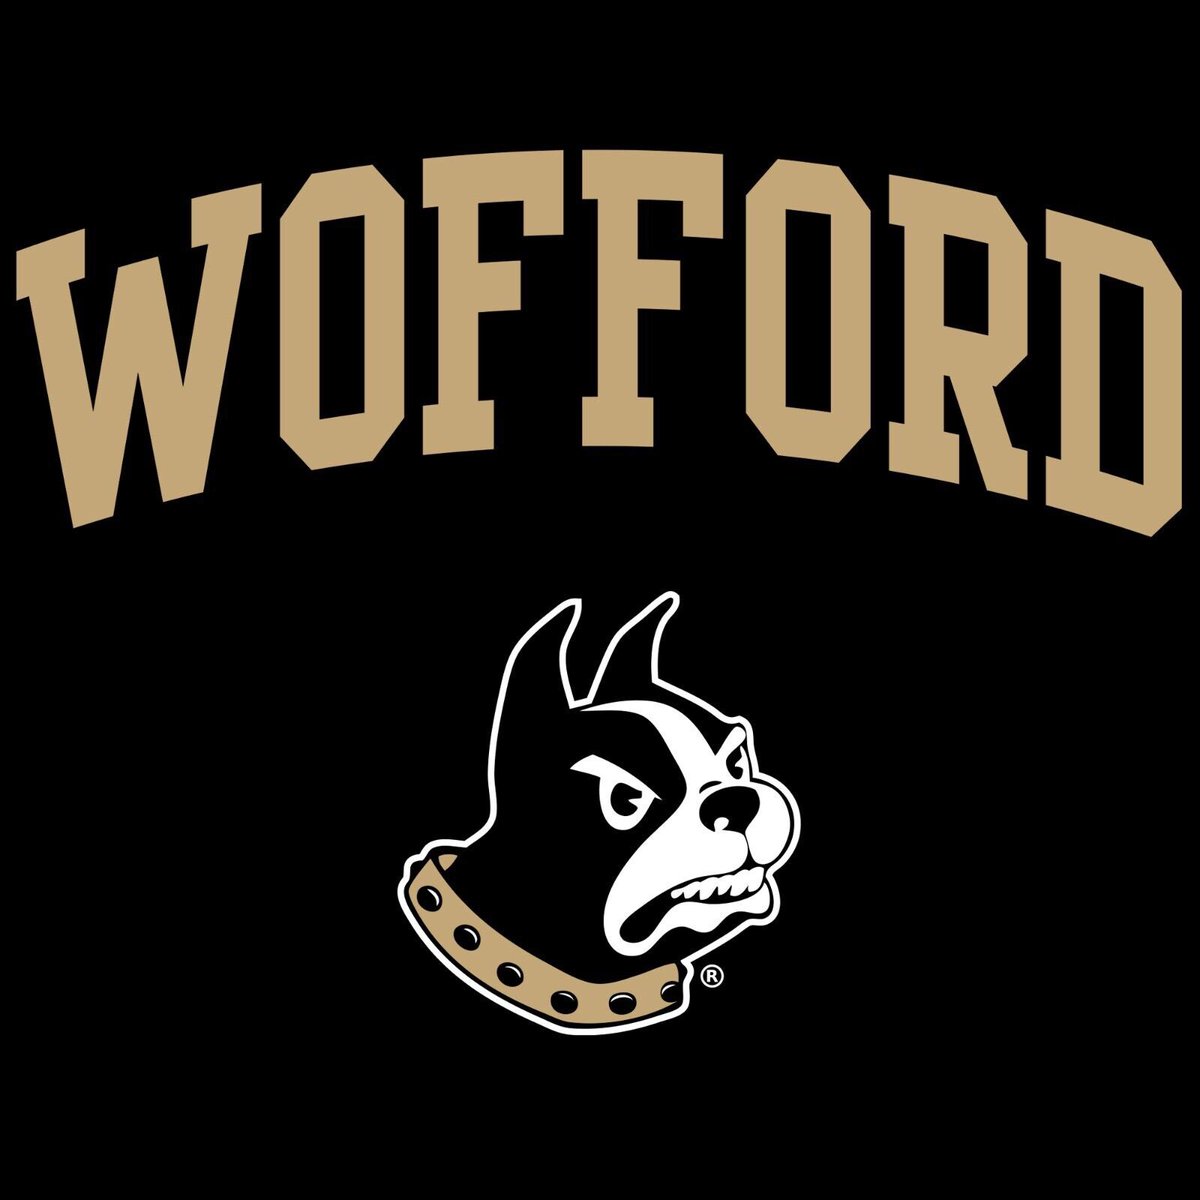 AGTG!! / After a conversation with @CoachEmini i'm blessed to receive my 8th D1 scholarship from @Wofford_FB .+ @SwickONE8 @coachdowns_gary @CoachBeck56 @Frfountain2002 @CollinsHillFB @coachMMartin54 @JeremyO_Johnson @RecruitGeorgia @ChadSimmons_